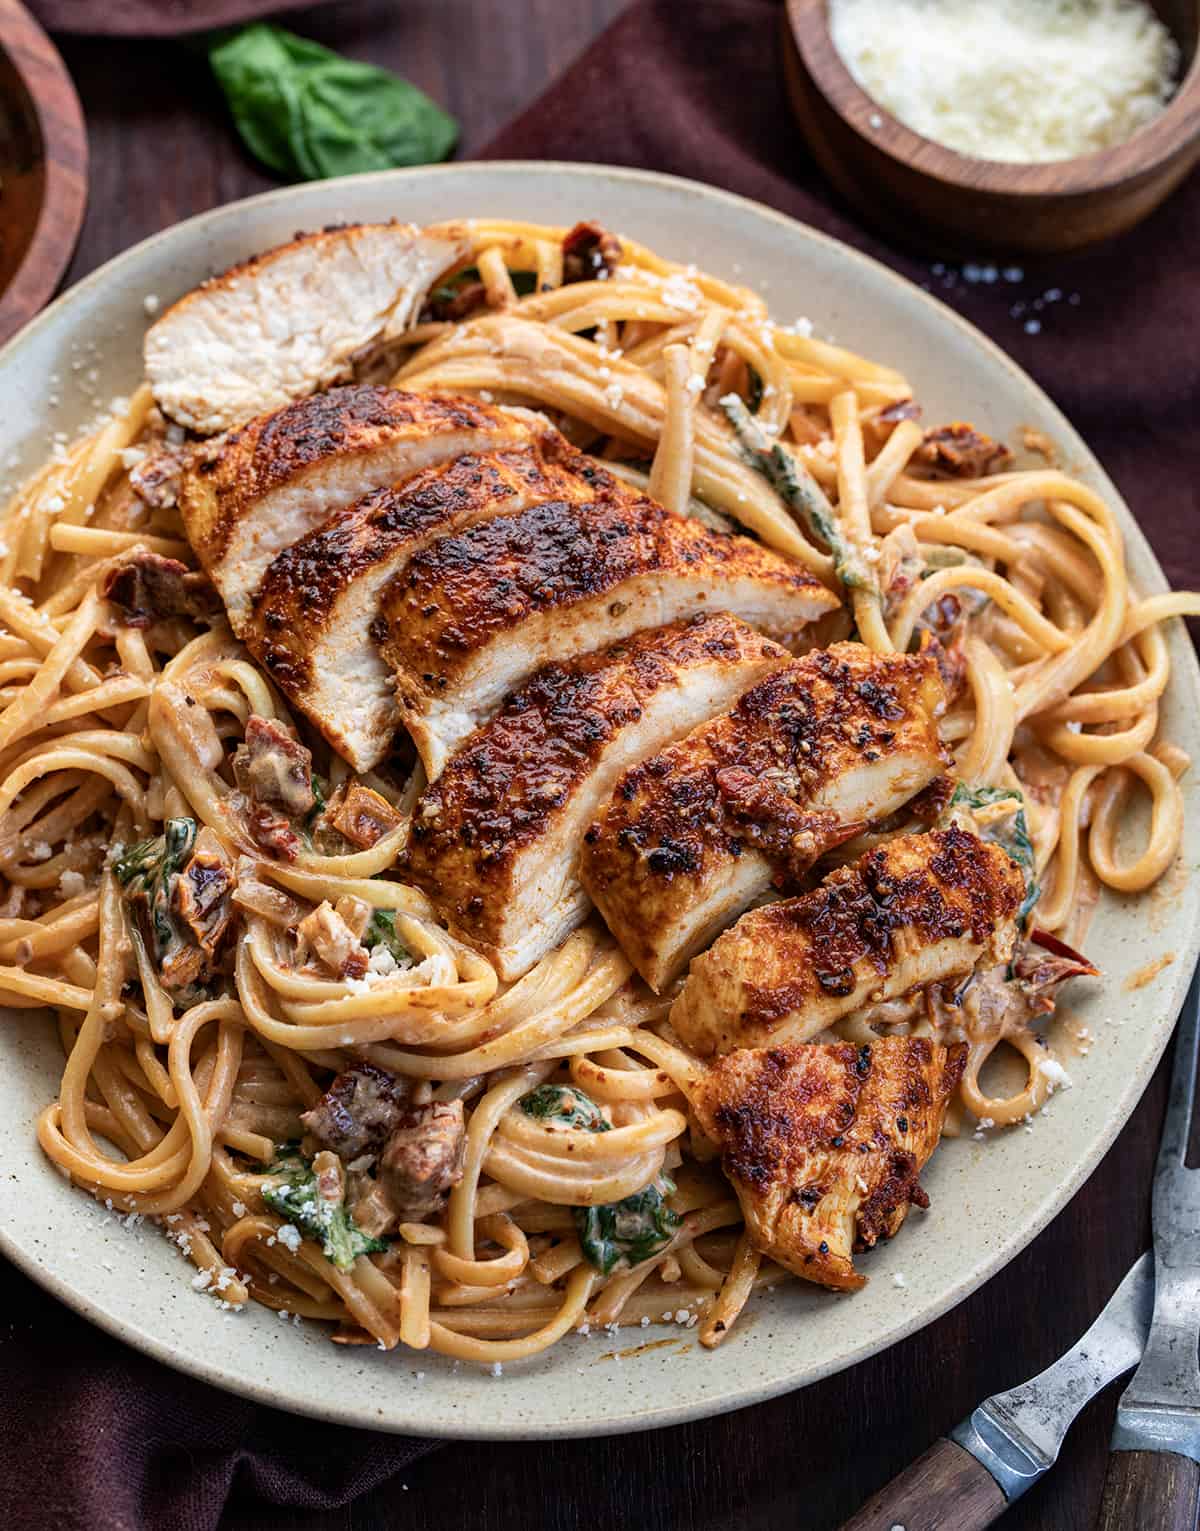 Plate of Spicy Tuscan Chicken Pasta with Sliced Chicken on a Bed of Creamy Noodles.